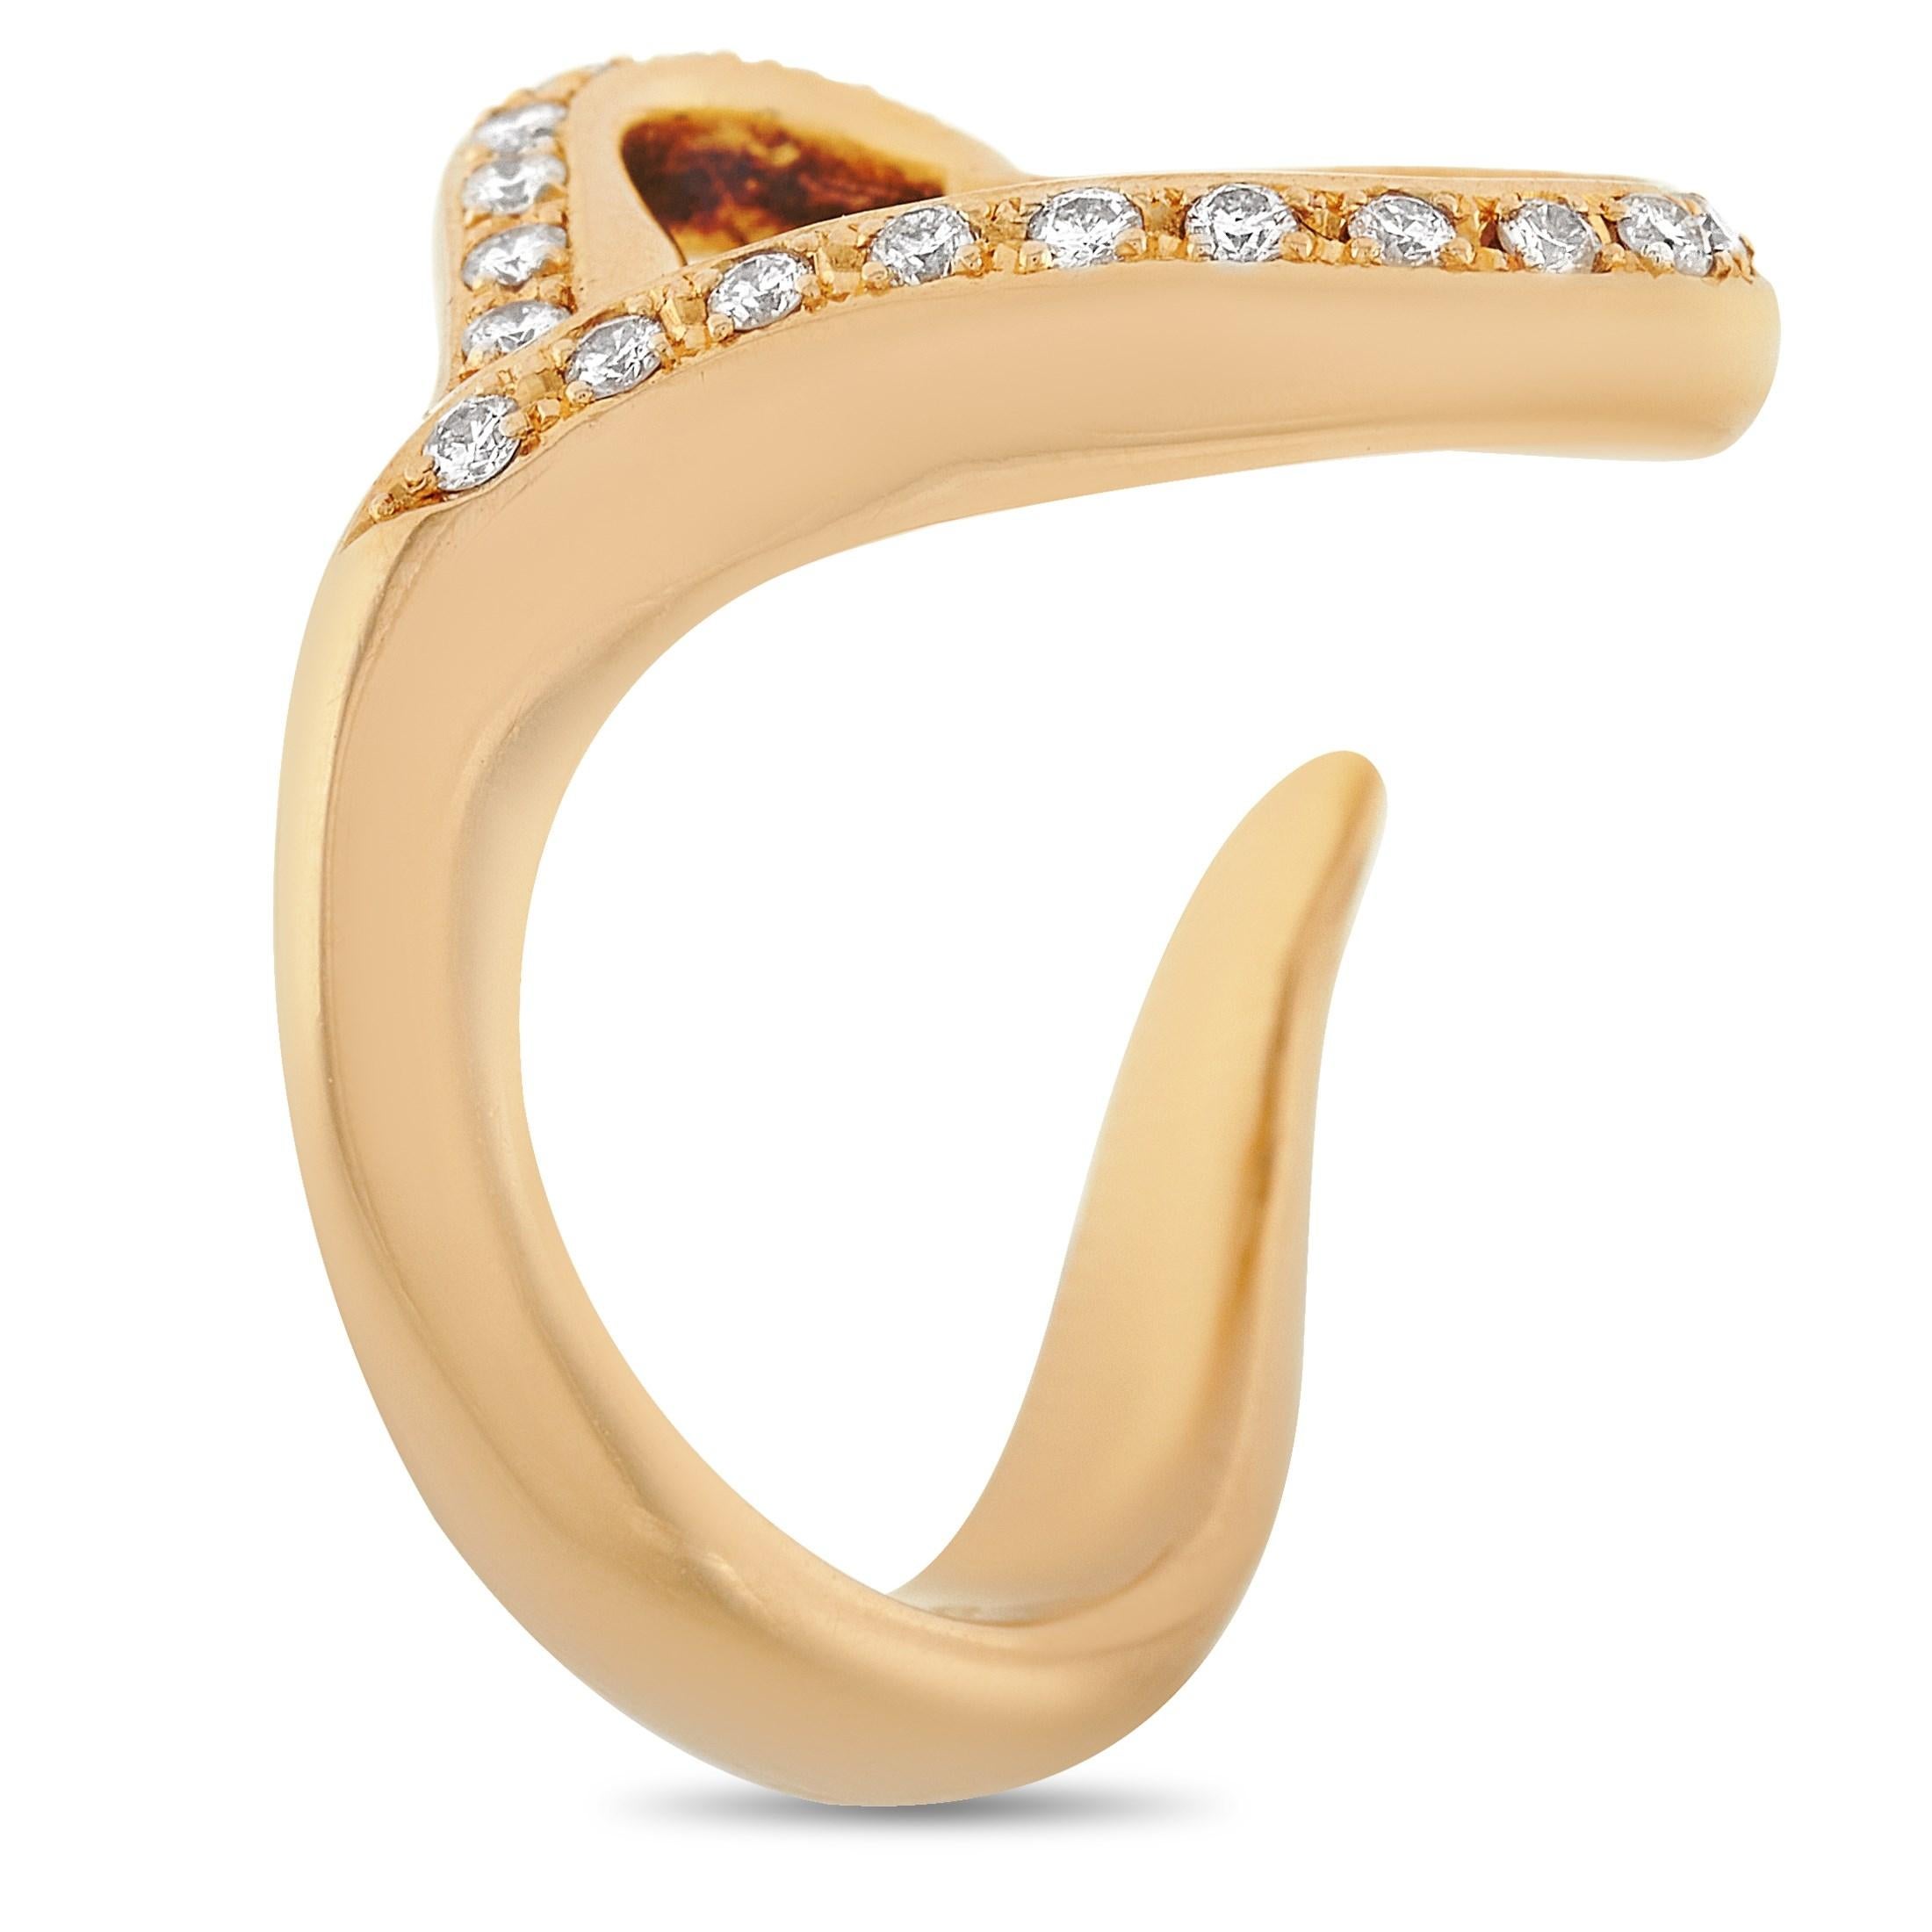 This Tiffany & Co. ring is unique and symbolizes affection from whoever is giving it. The ring is crafted from 18K yellow gold and set with 0.20 carats OF diamondS around the heart shape. It weighs 8.1 grams with a band thickness of 3mm, a top